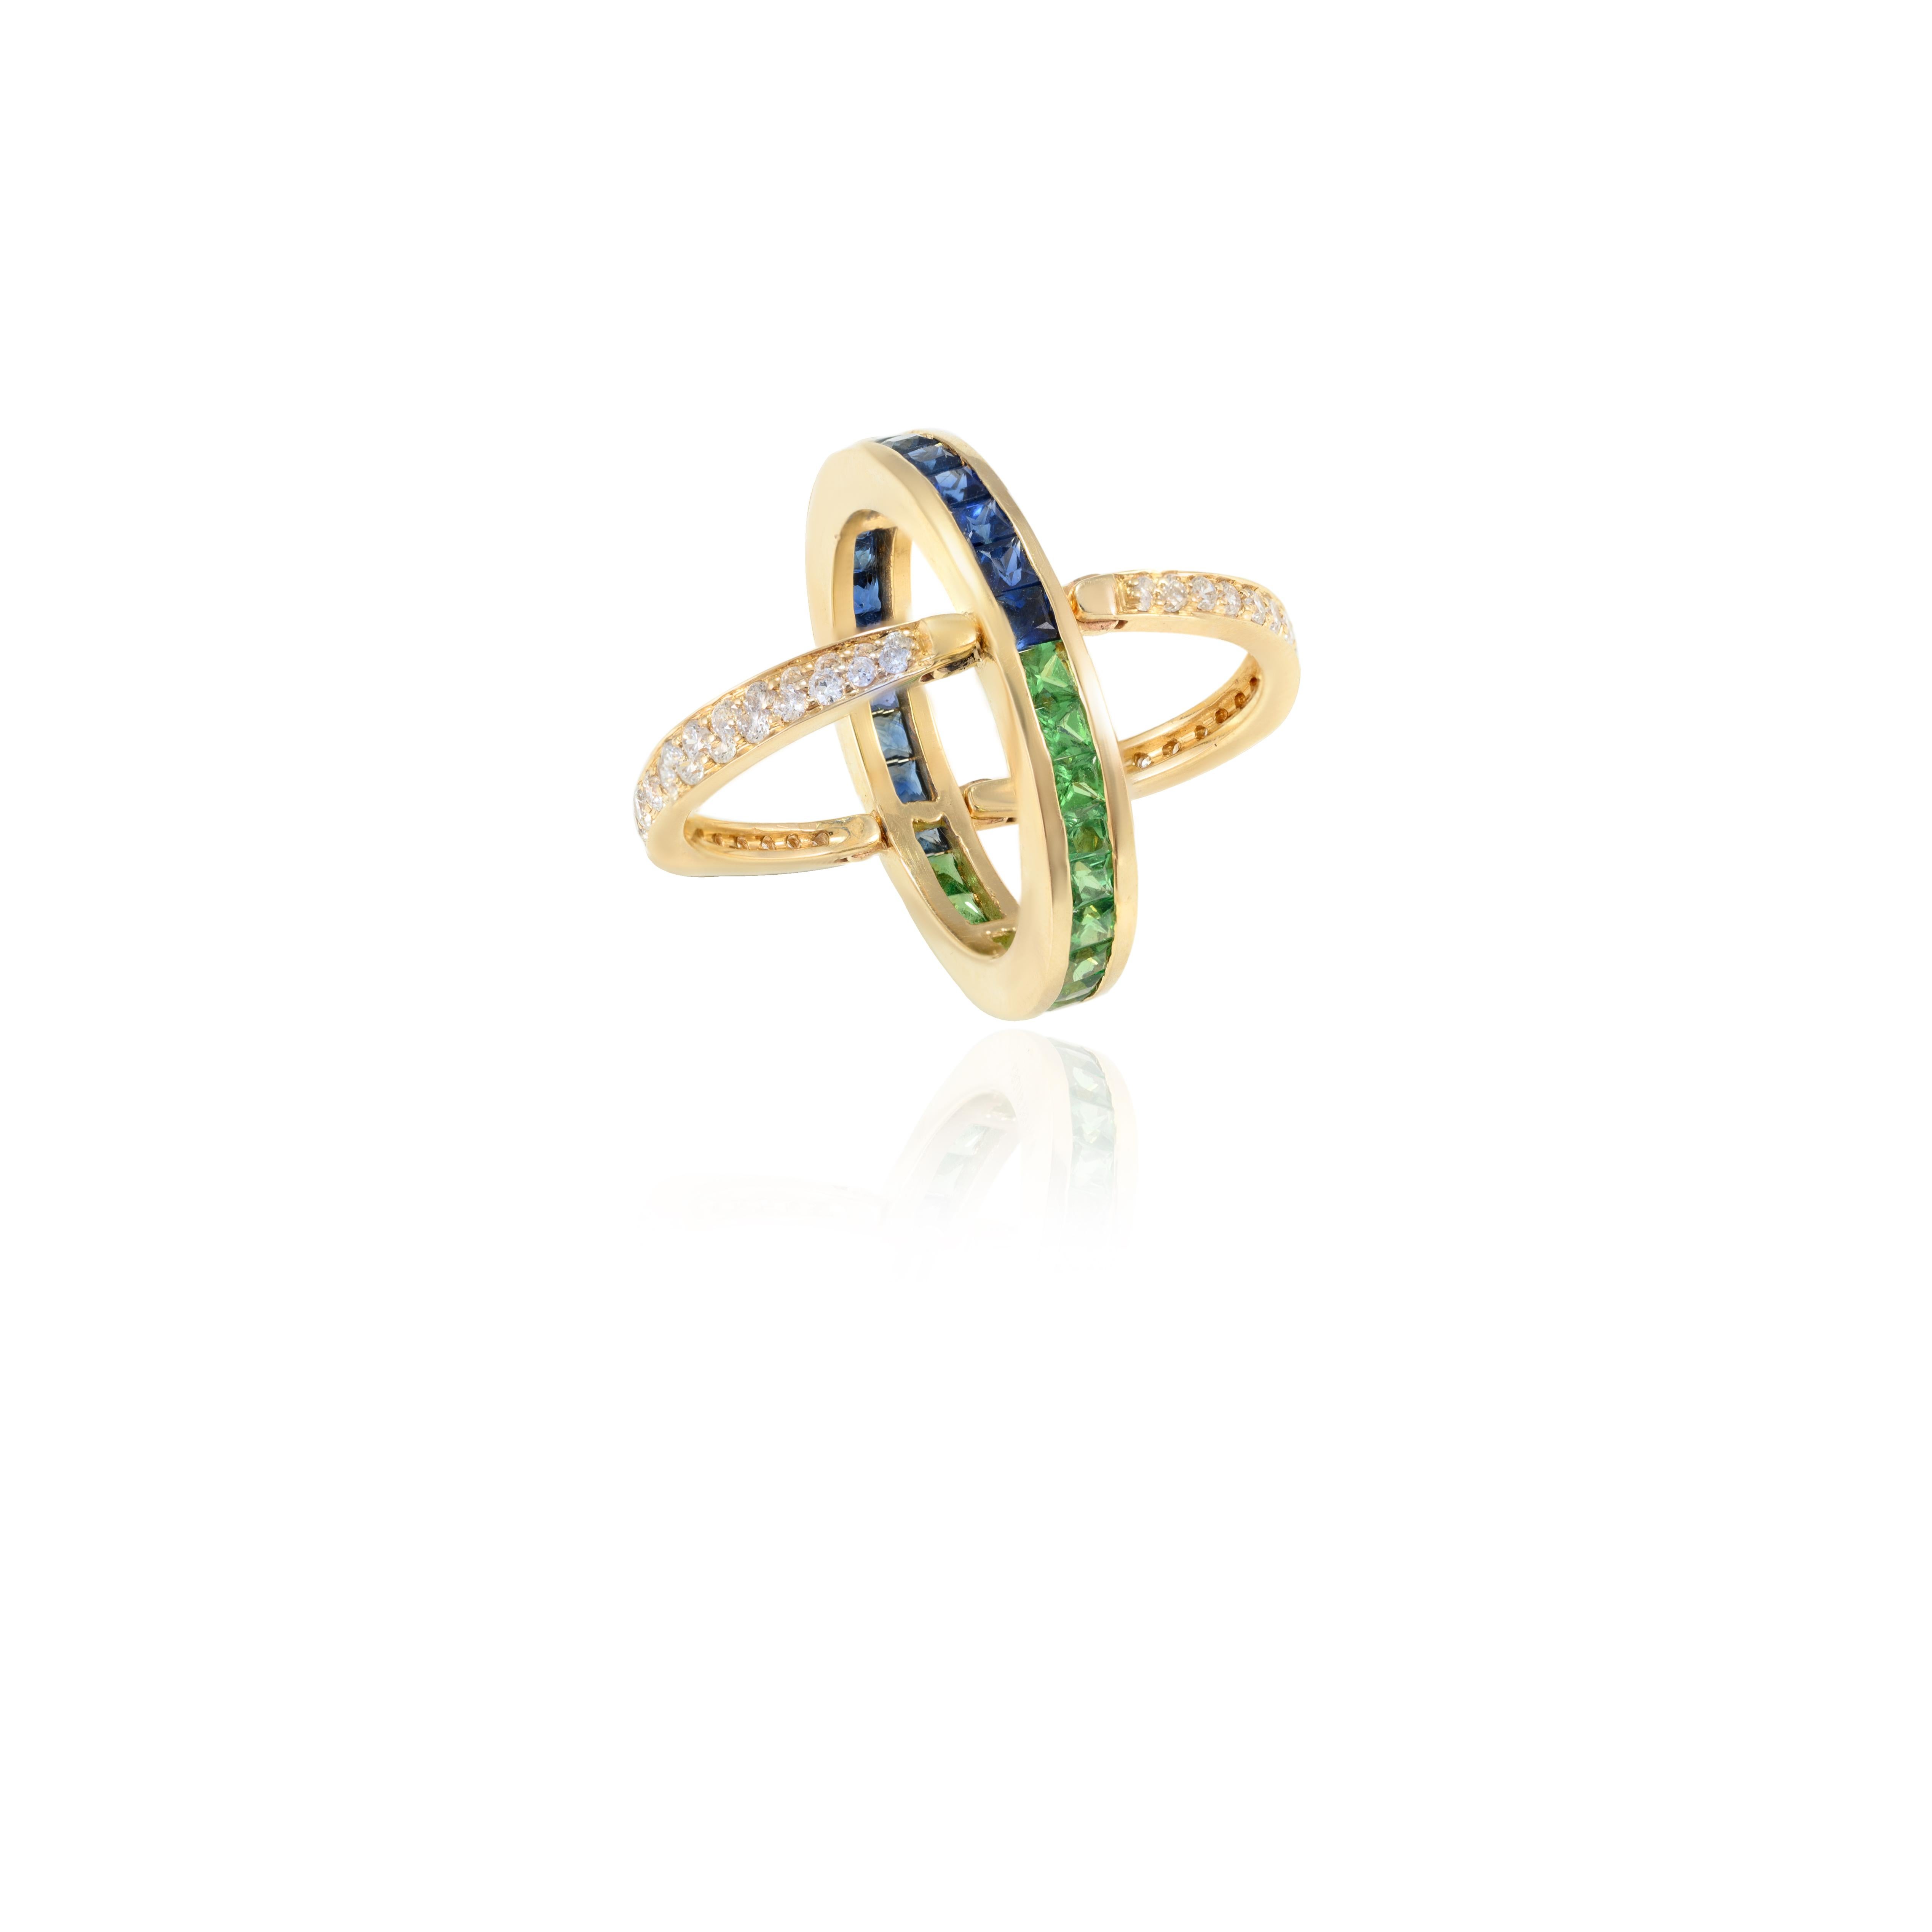 For Sale:  Unique 14k Yellow Gold Emerald and Sapphire Reversible Ring with Diamonds 5